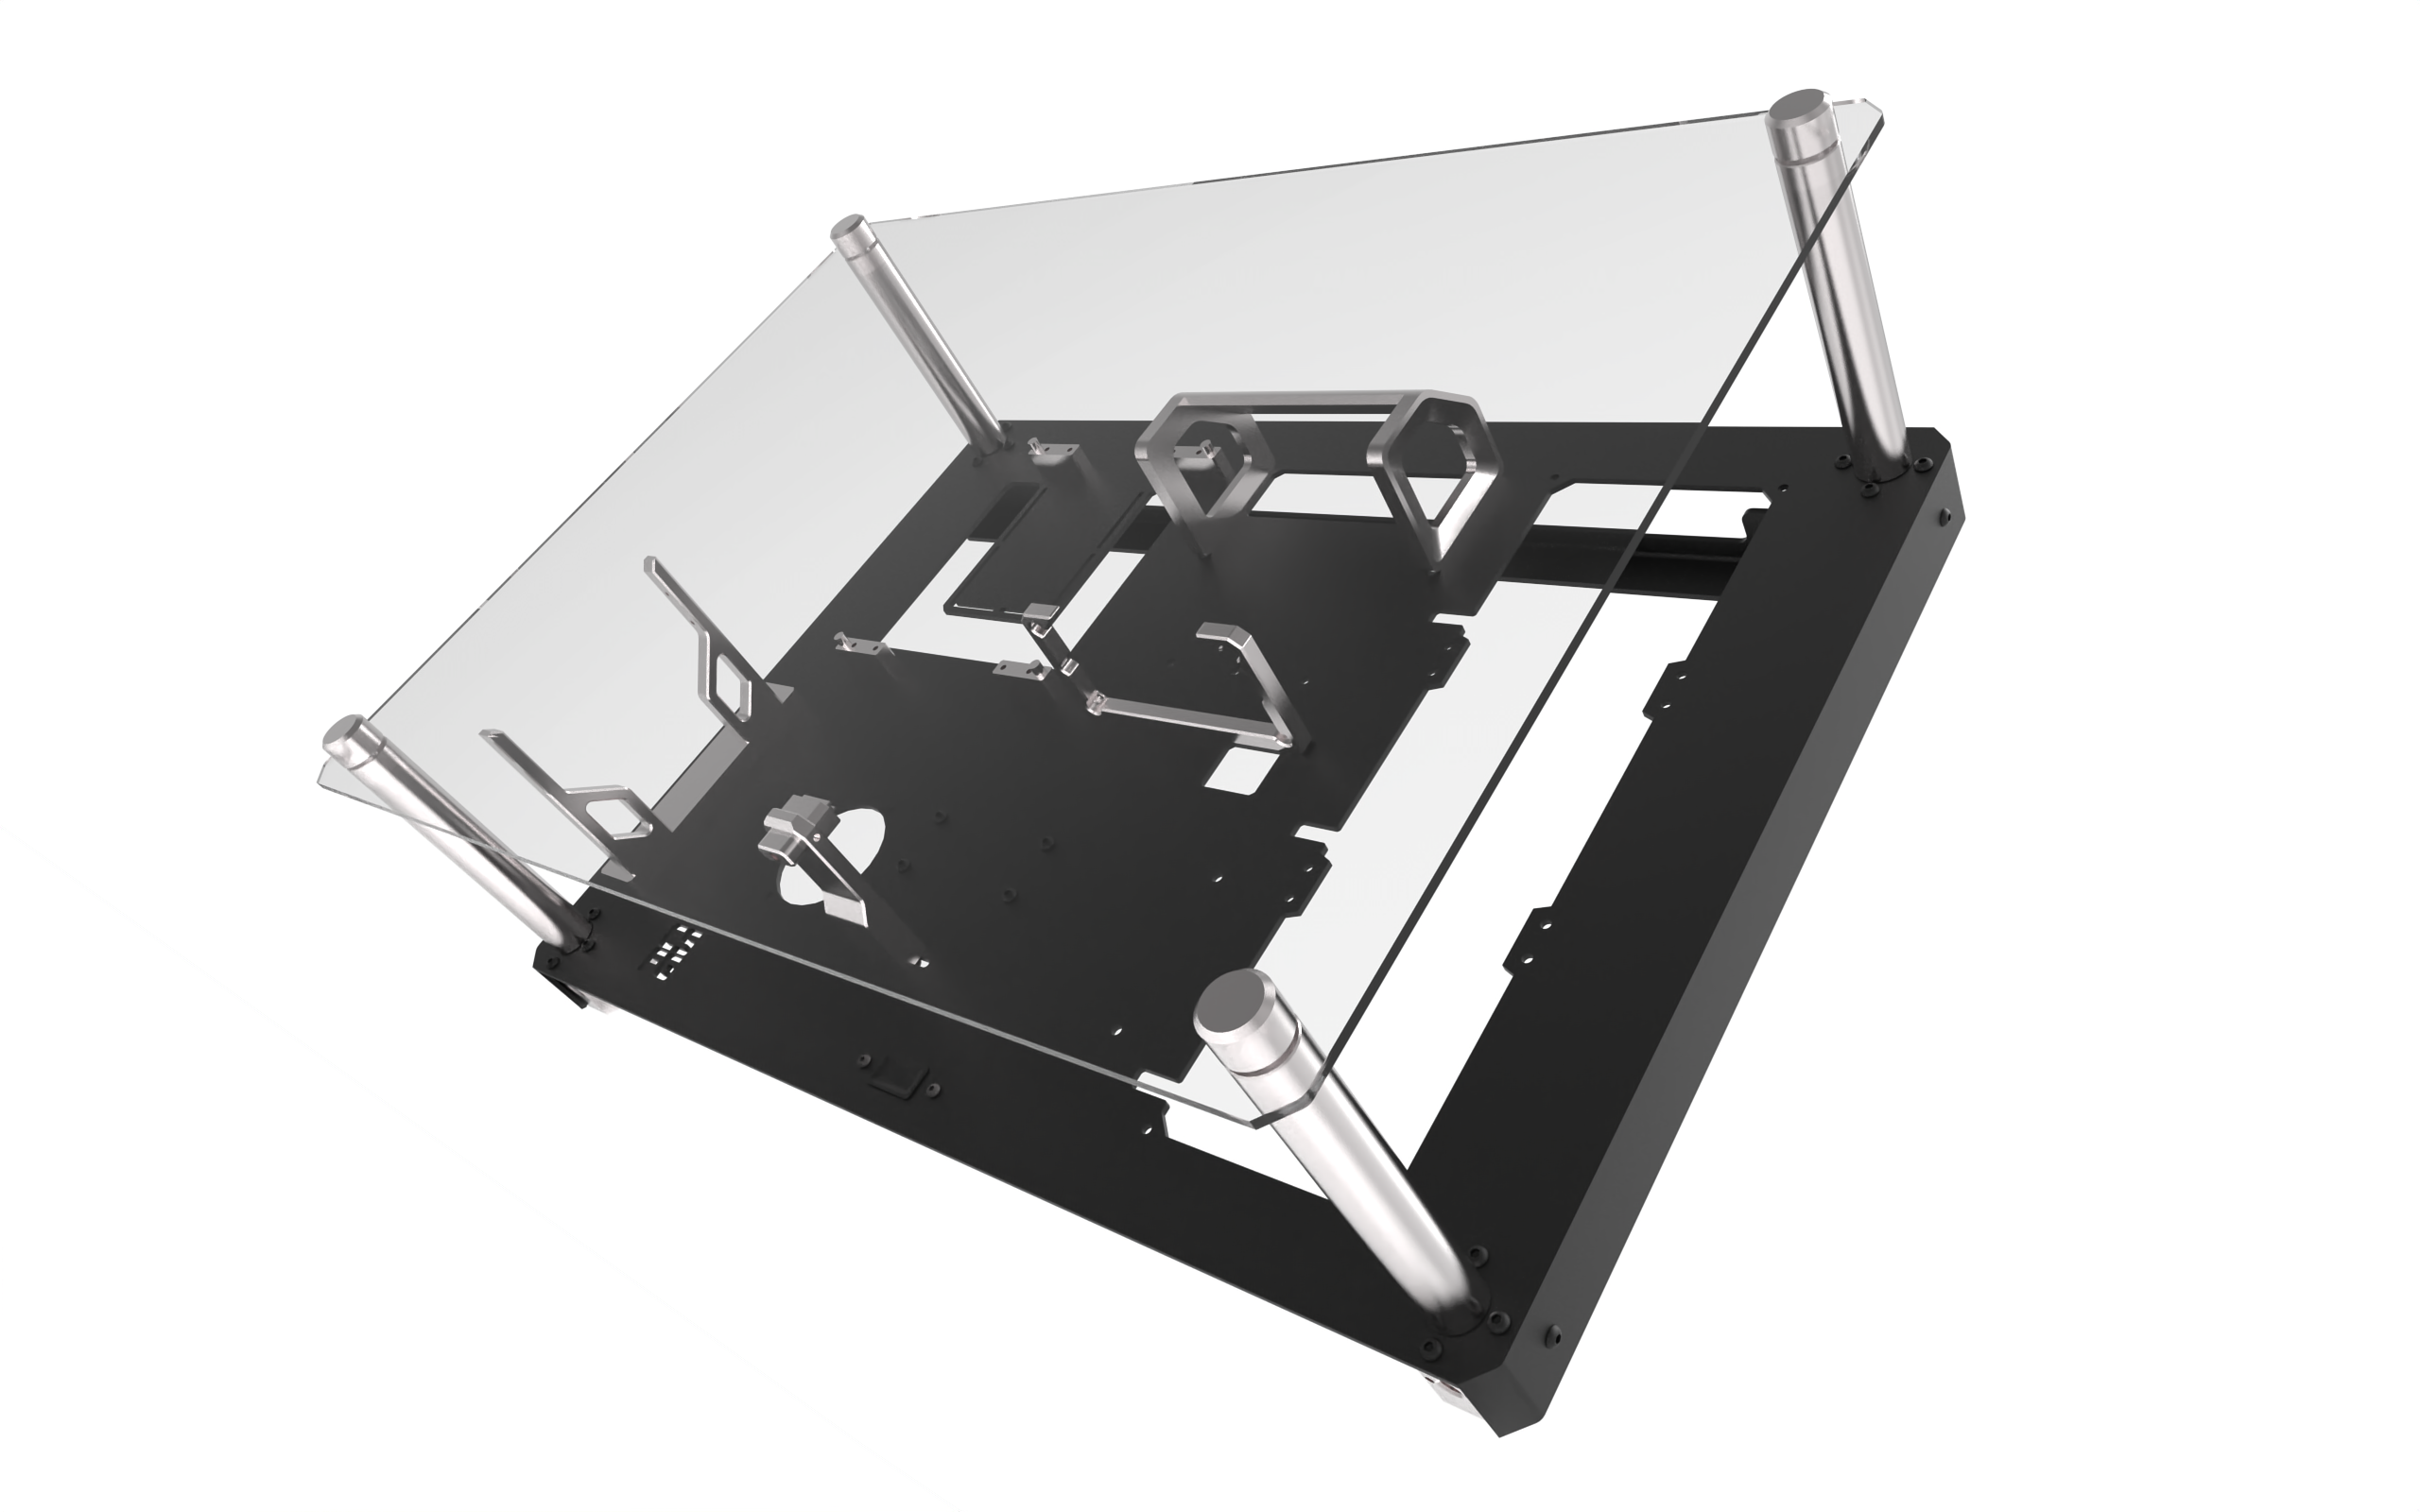 csfg-creative-solutions-for-gamers - CSFG Creative Solutions For Gamers Frostbite M-ITX Wall mounted Chassis - Black